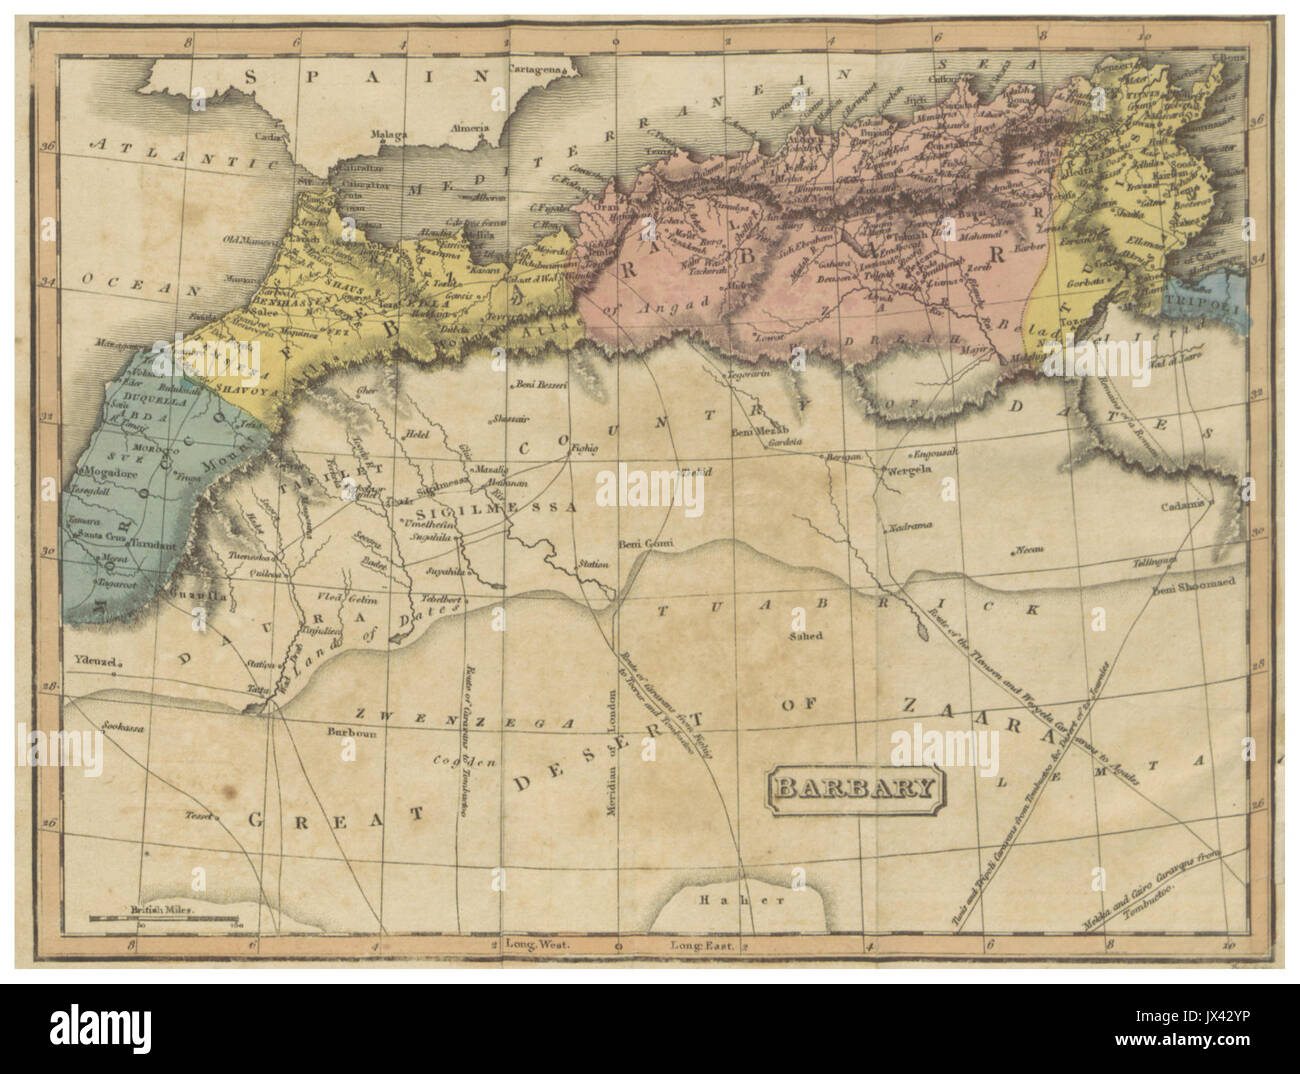 1817 Map Of The Barbary State JX42YP 